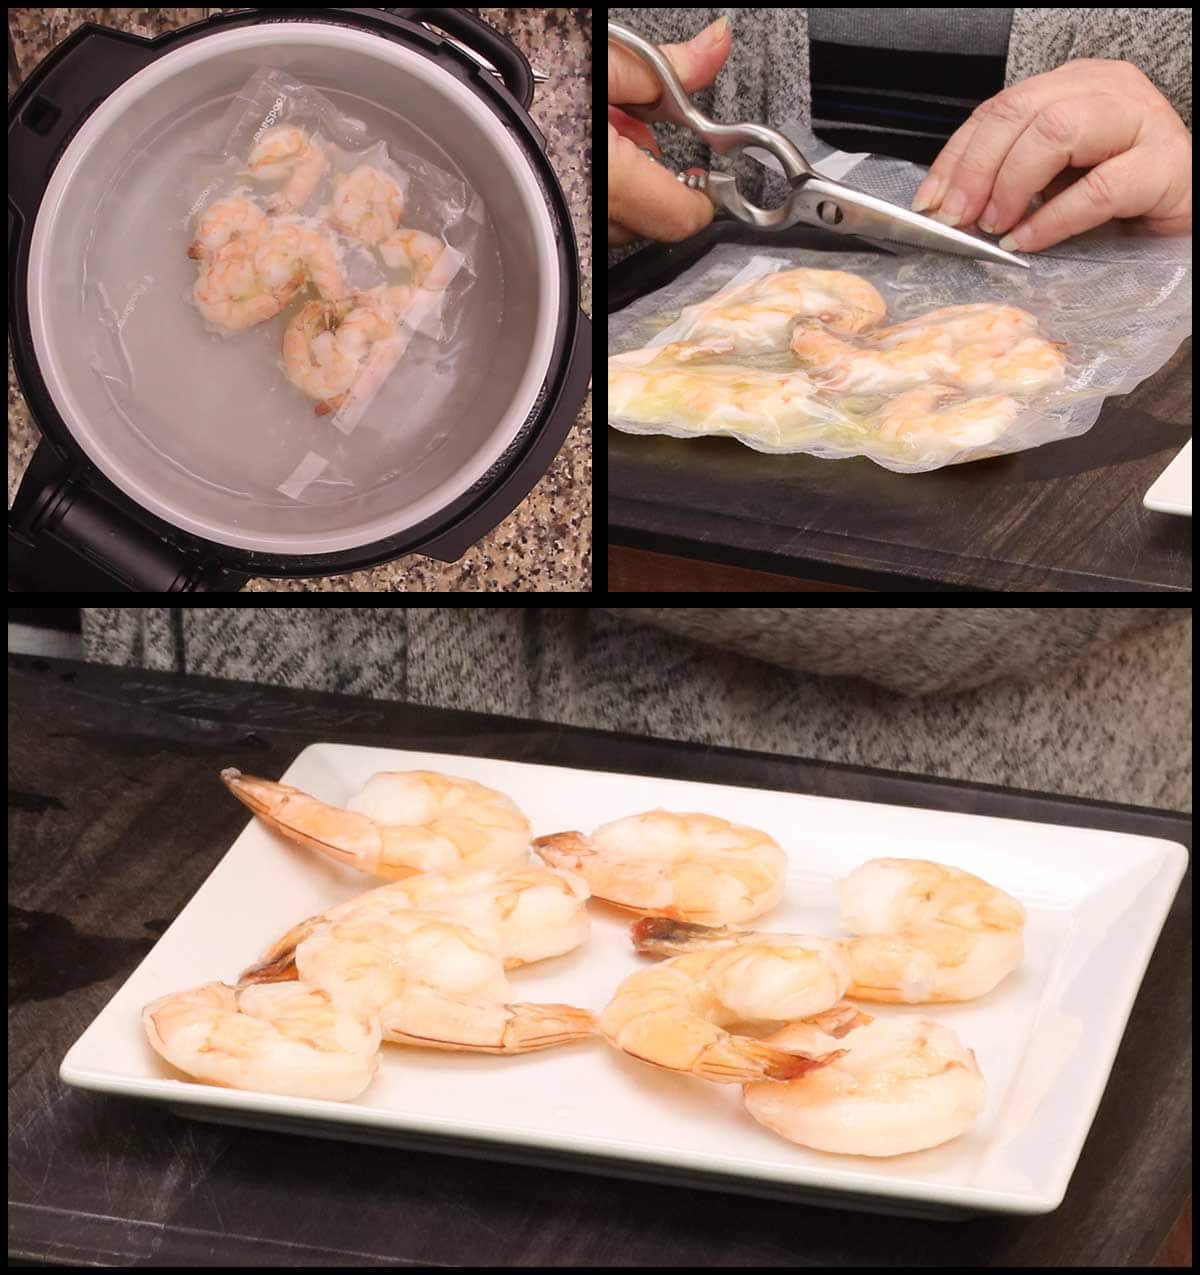 removing shrimp and putting them on a plate after sous vide cooking